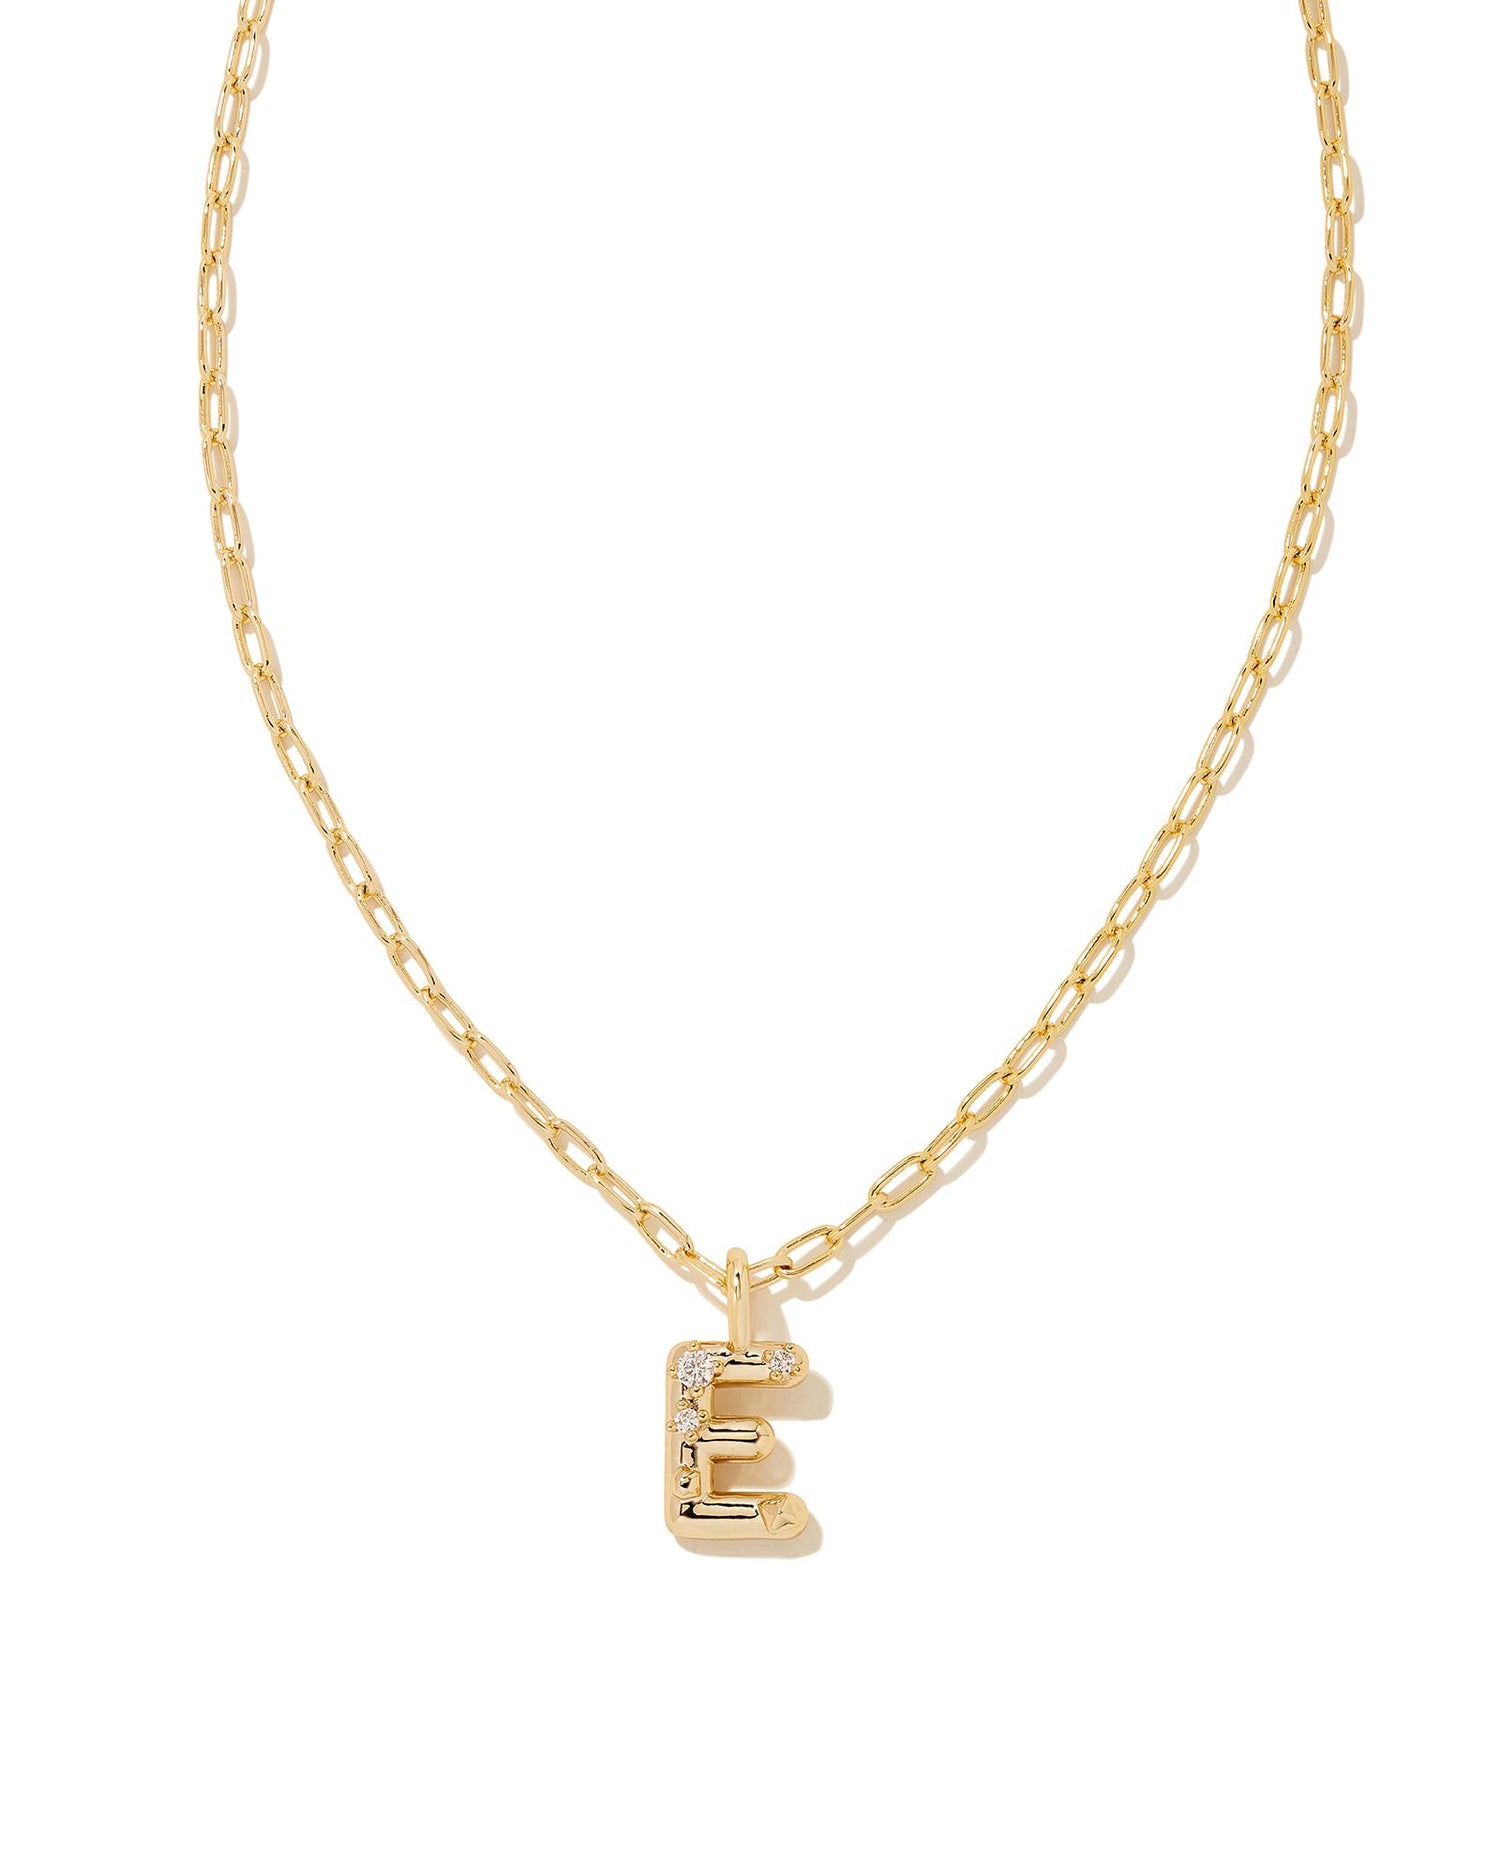 Personalize your everyday look with the Crystal Letter Short Pendant Necklace in White Crystal. Whether you’re rocking your initial or a loved one’s, this sentimental layer is one you’ll keep coming back to again and again.  Dimensions- 16' CHAIN WITH 3' EXTENDER, 0.62'L X 0.35"W PENDANT Metal- 14K Gold plated over brass Closure- Lobster Clasp Material-   White CZ Letter E